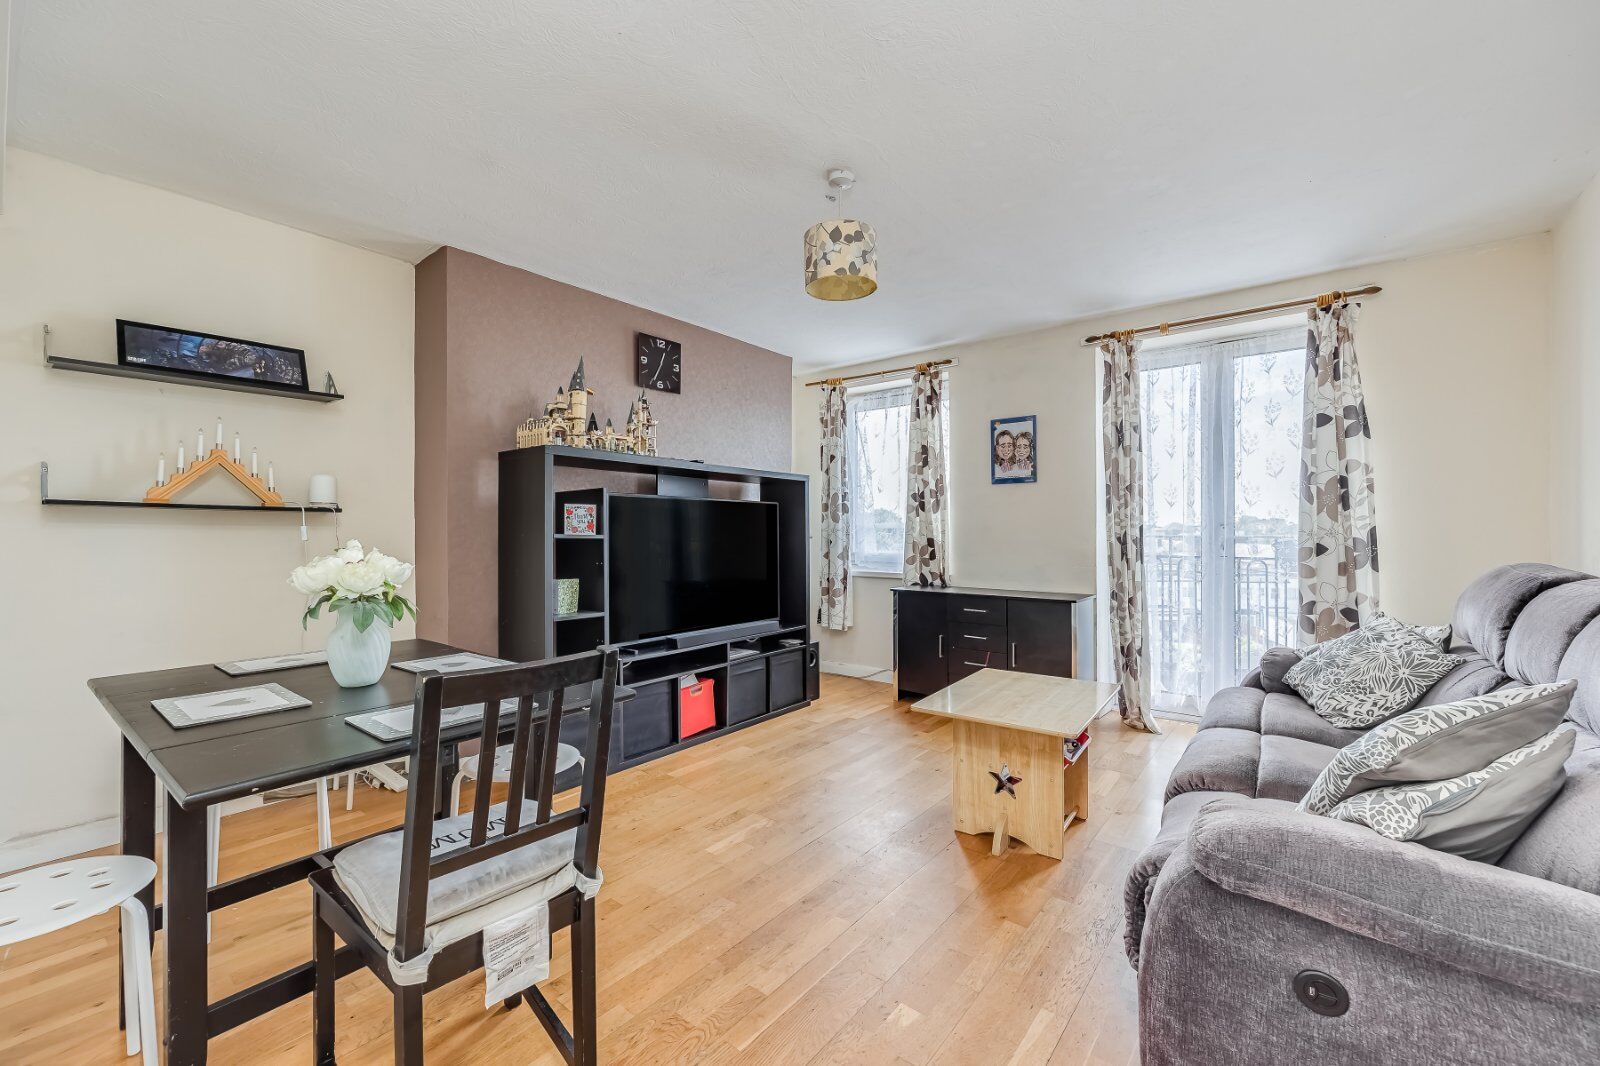 3 bedroom  flat for sale Elm Court, Armfield Crescent, CR4, main image